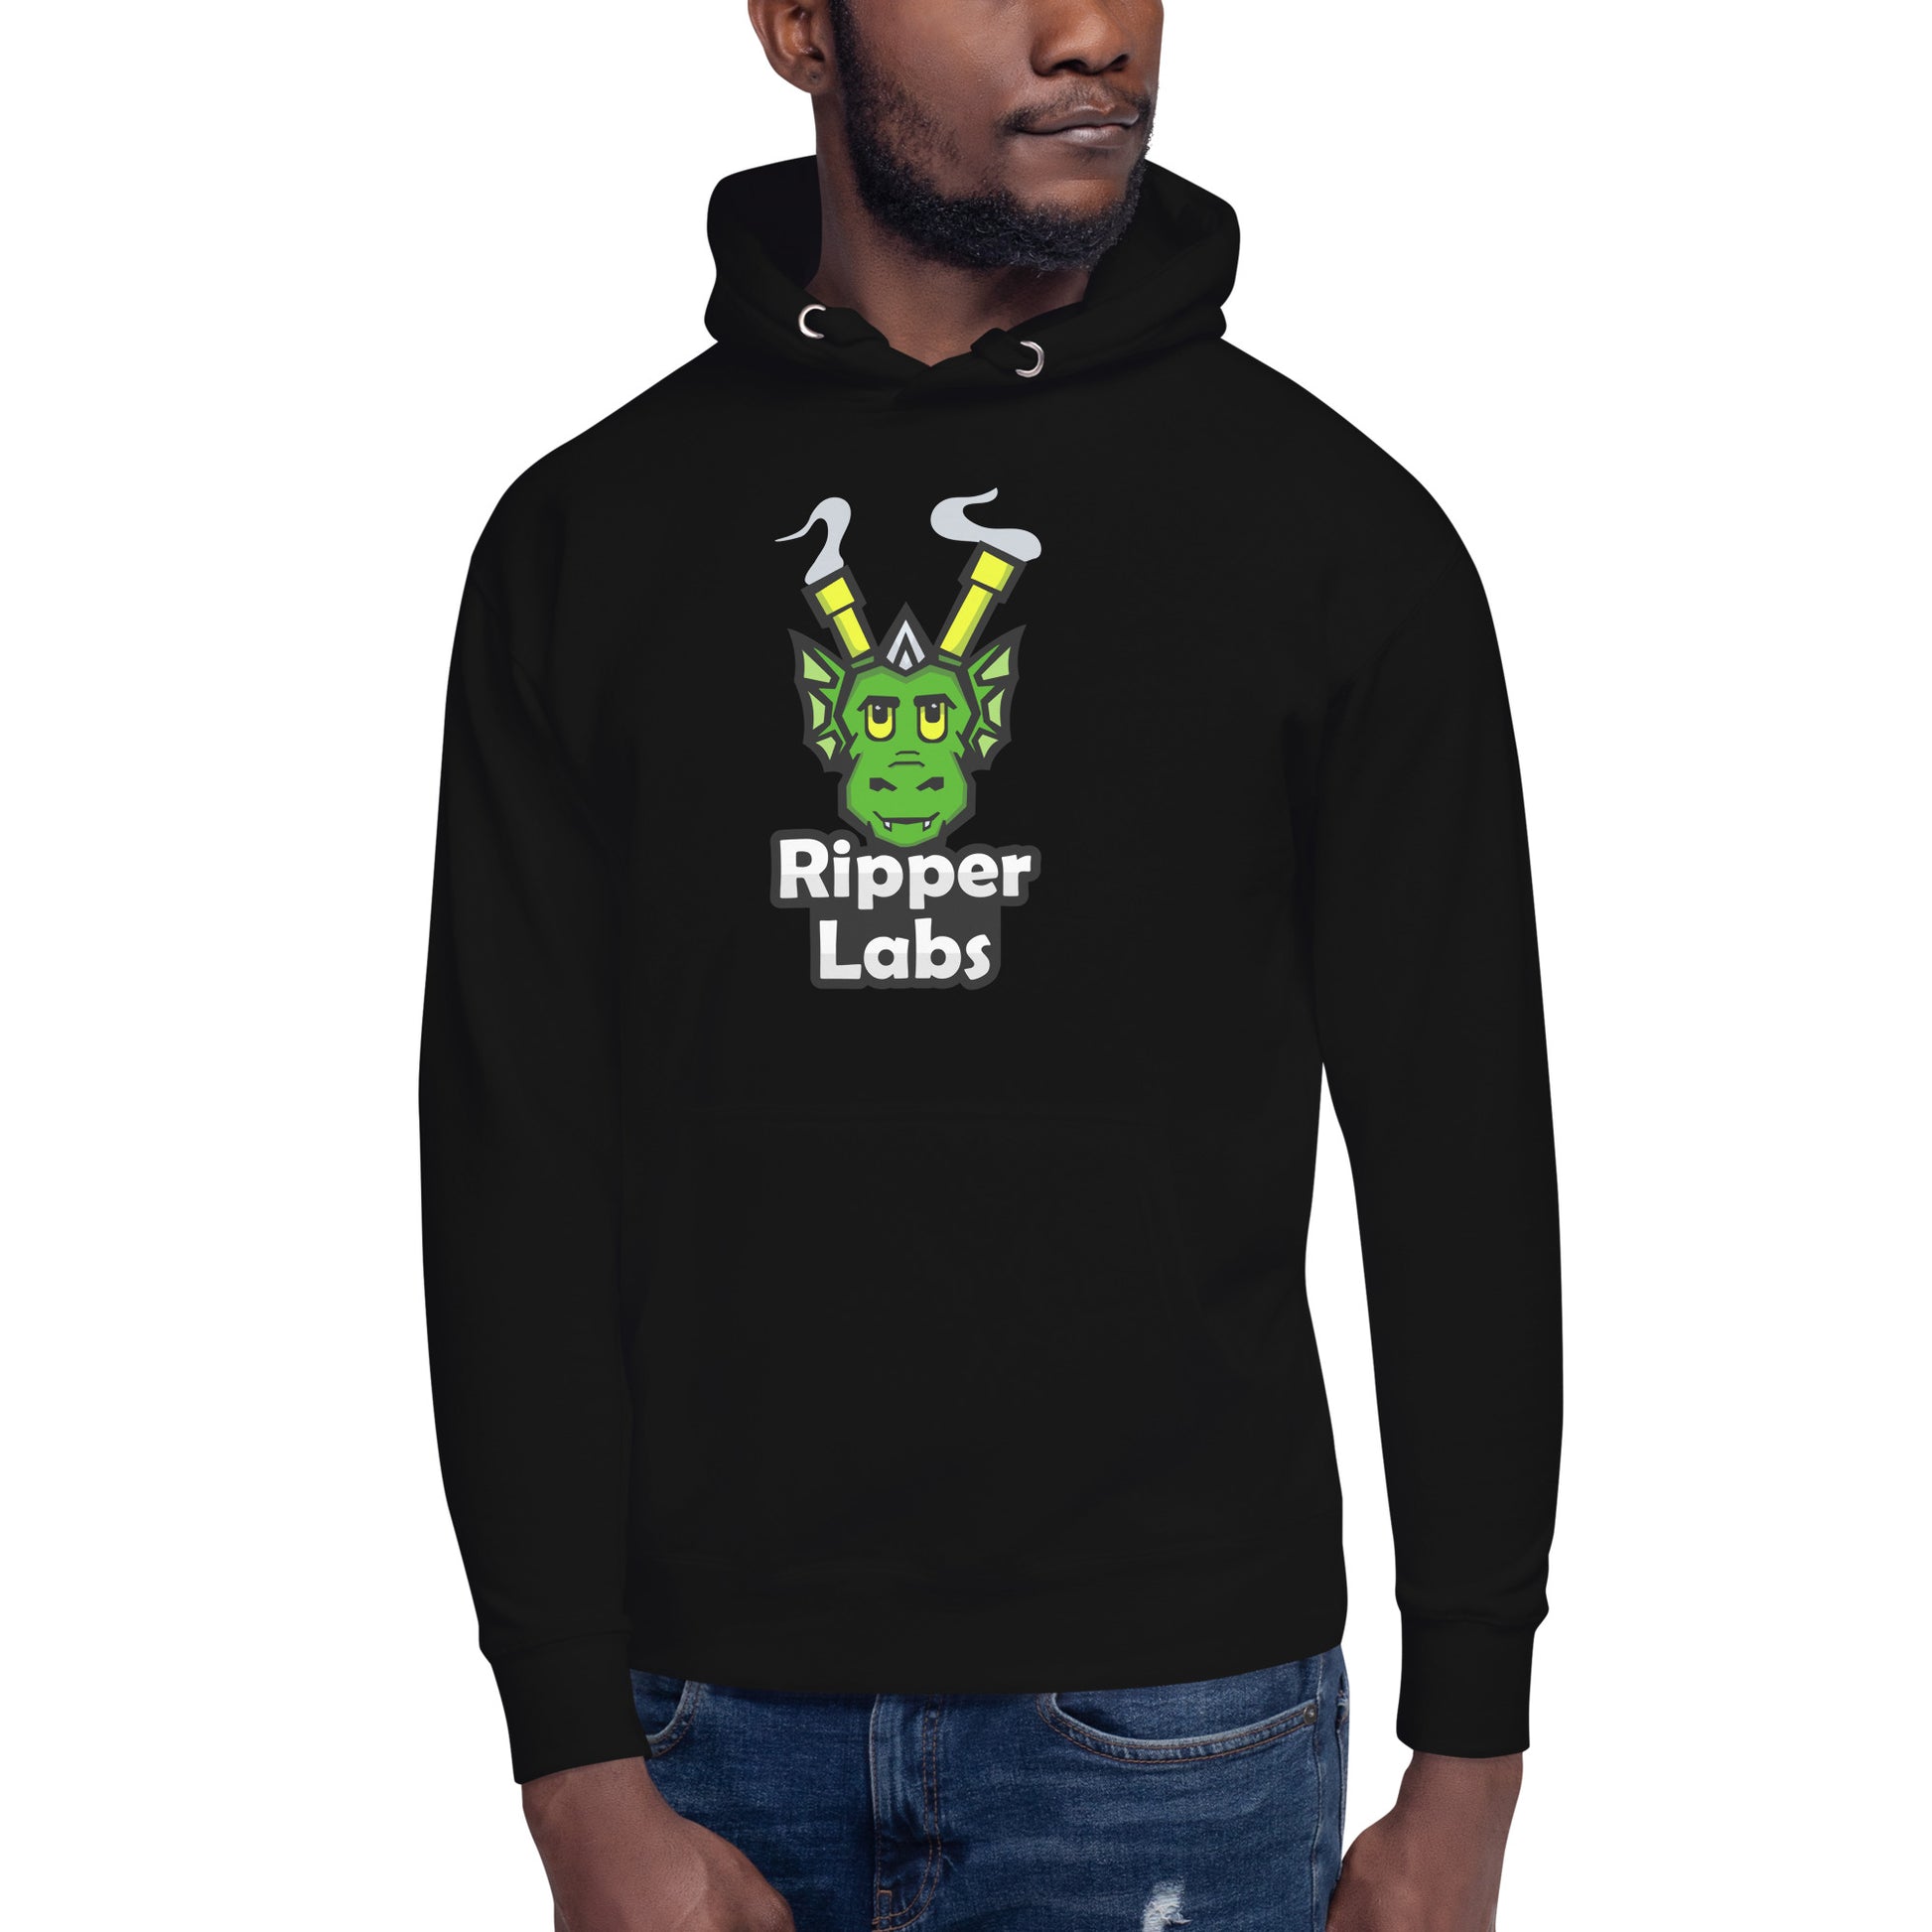 Ripper Labs hoodies are here! Ripper Labs hoodies come in 4 different colors: Black, Maroon, Purple, and Carbon Grey! Pre-order yours today!